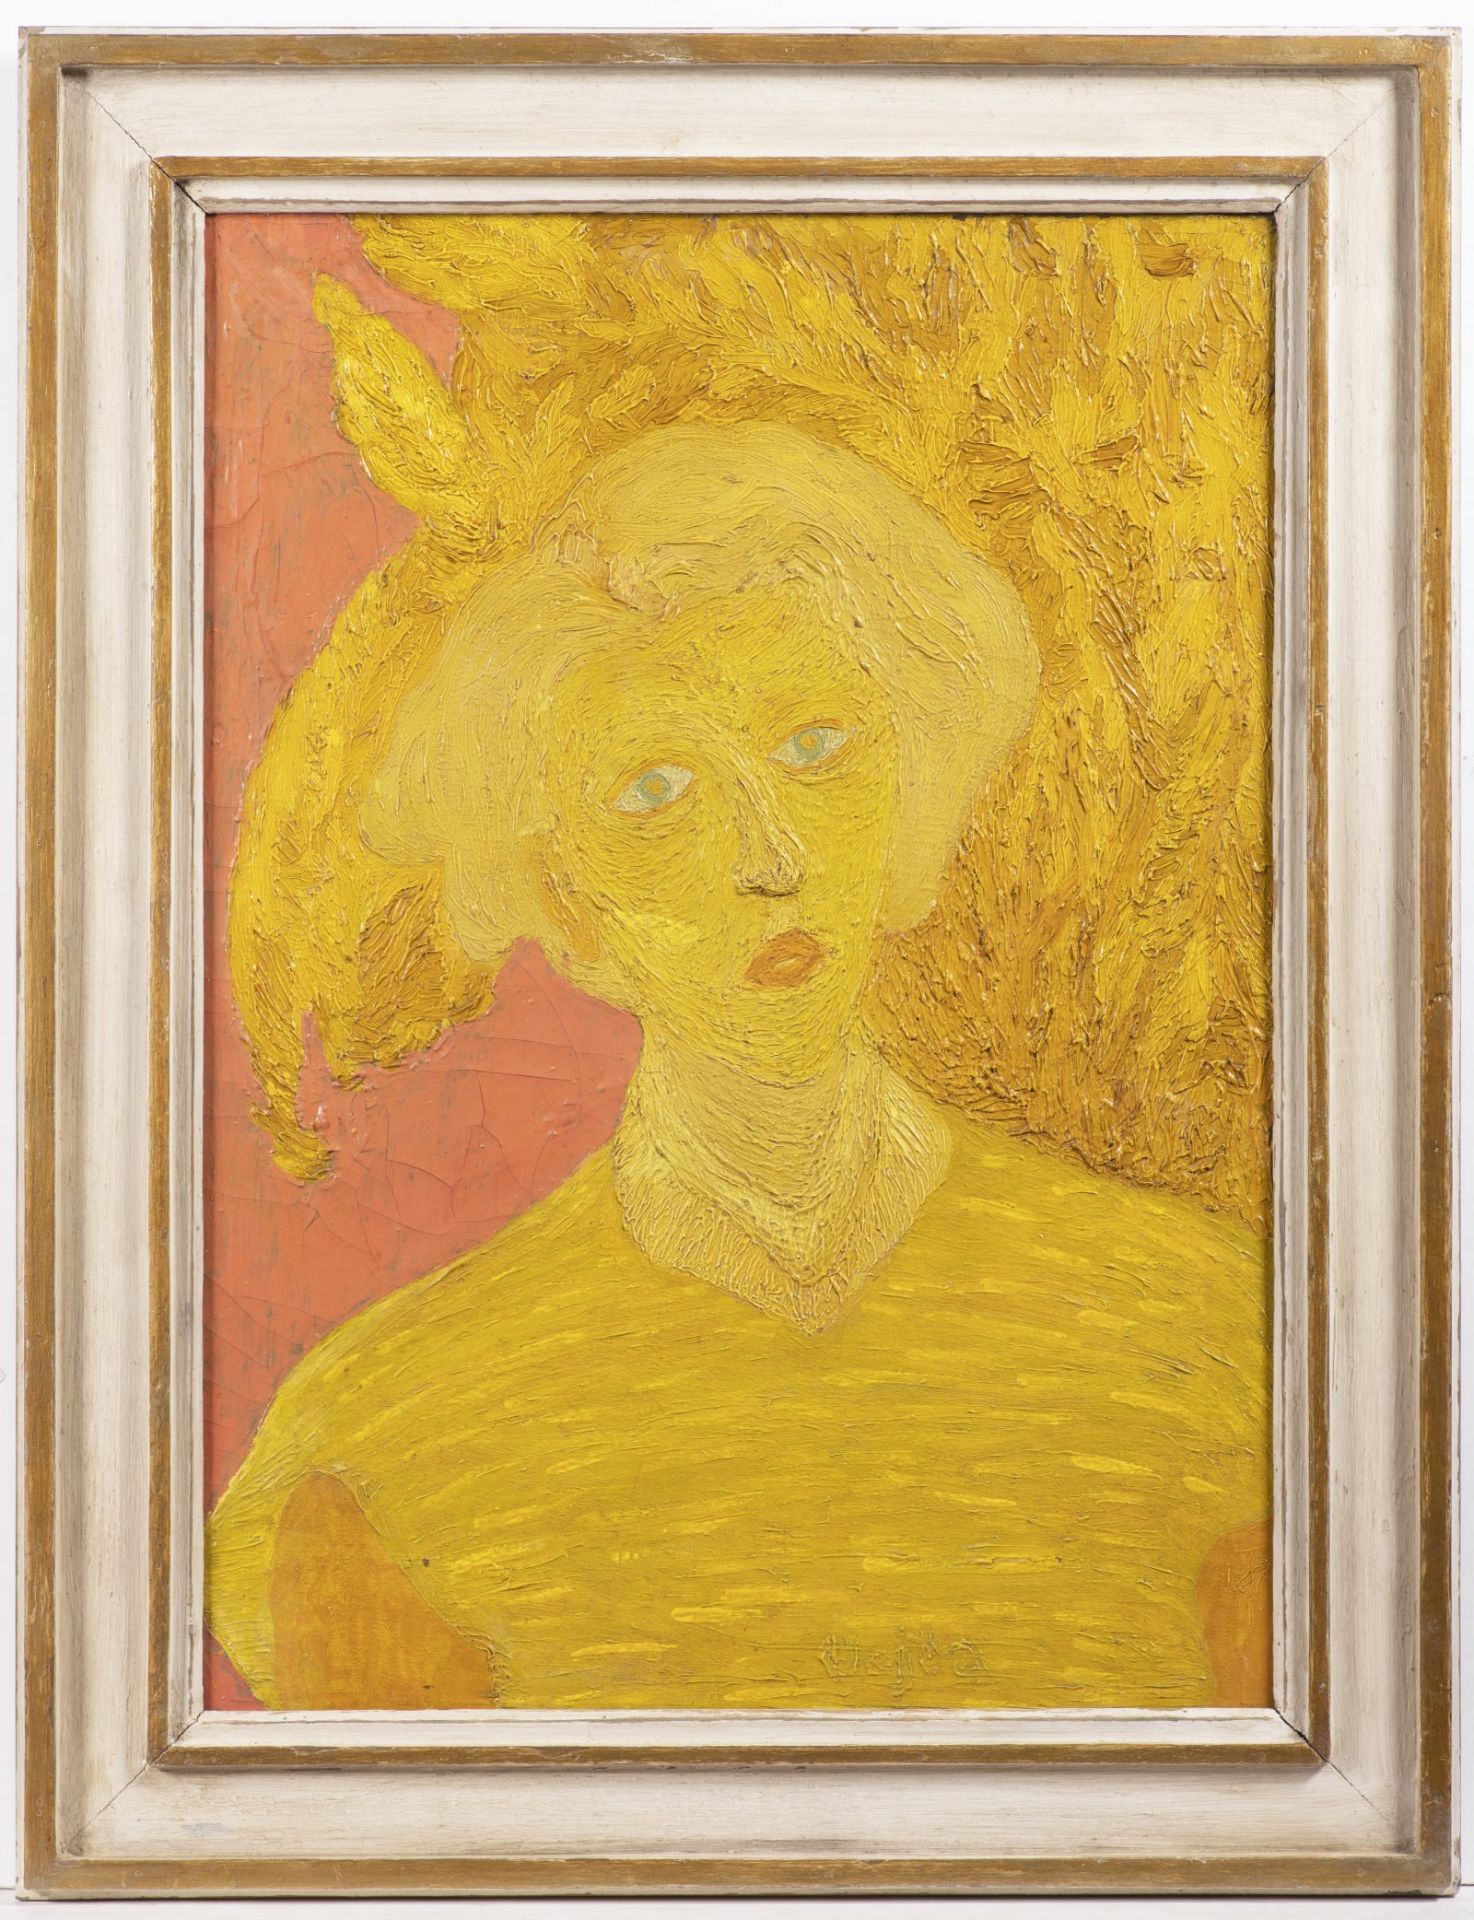 VOJTA NOLČ 1912 - 1989: A GIRL IN YELLOW 1953 -1956 Oil on canvas 70 x 52 cm Signed: Lower right "